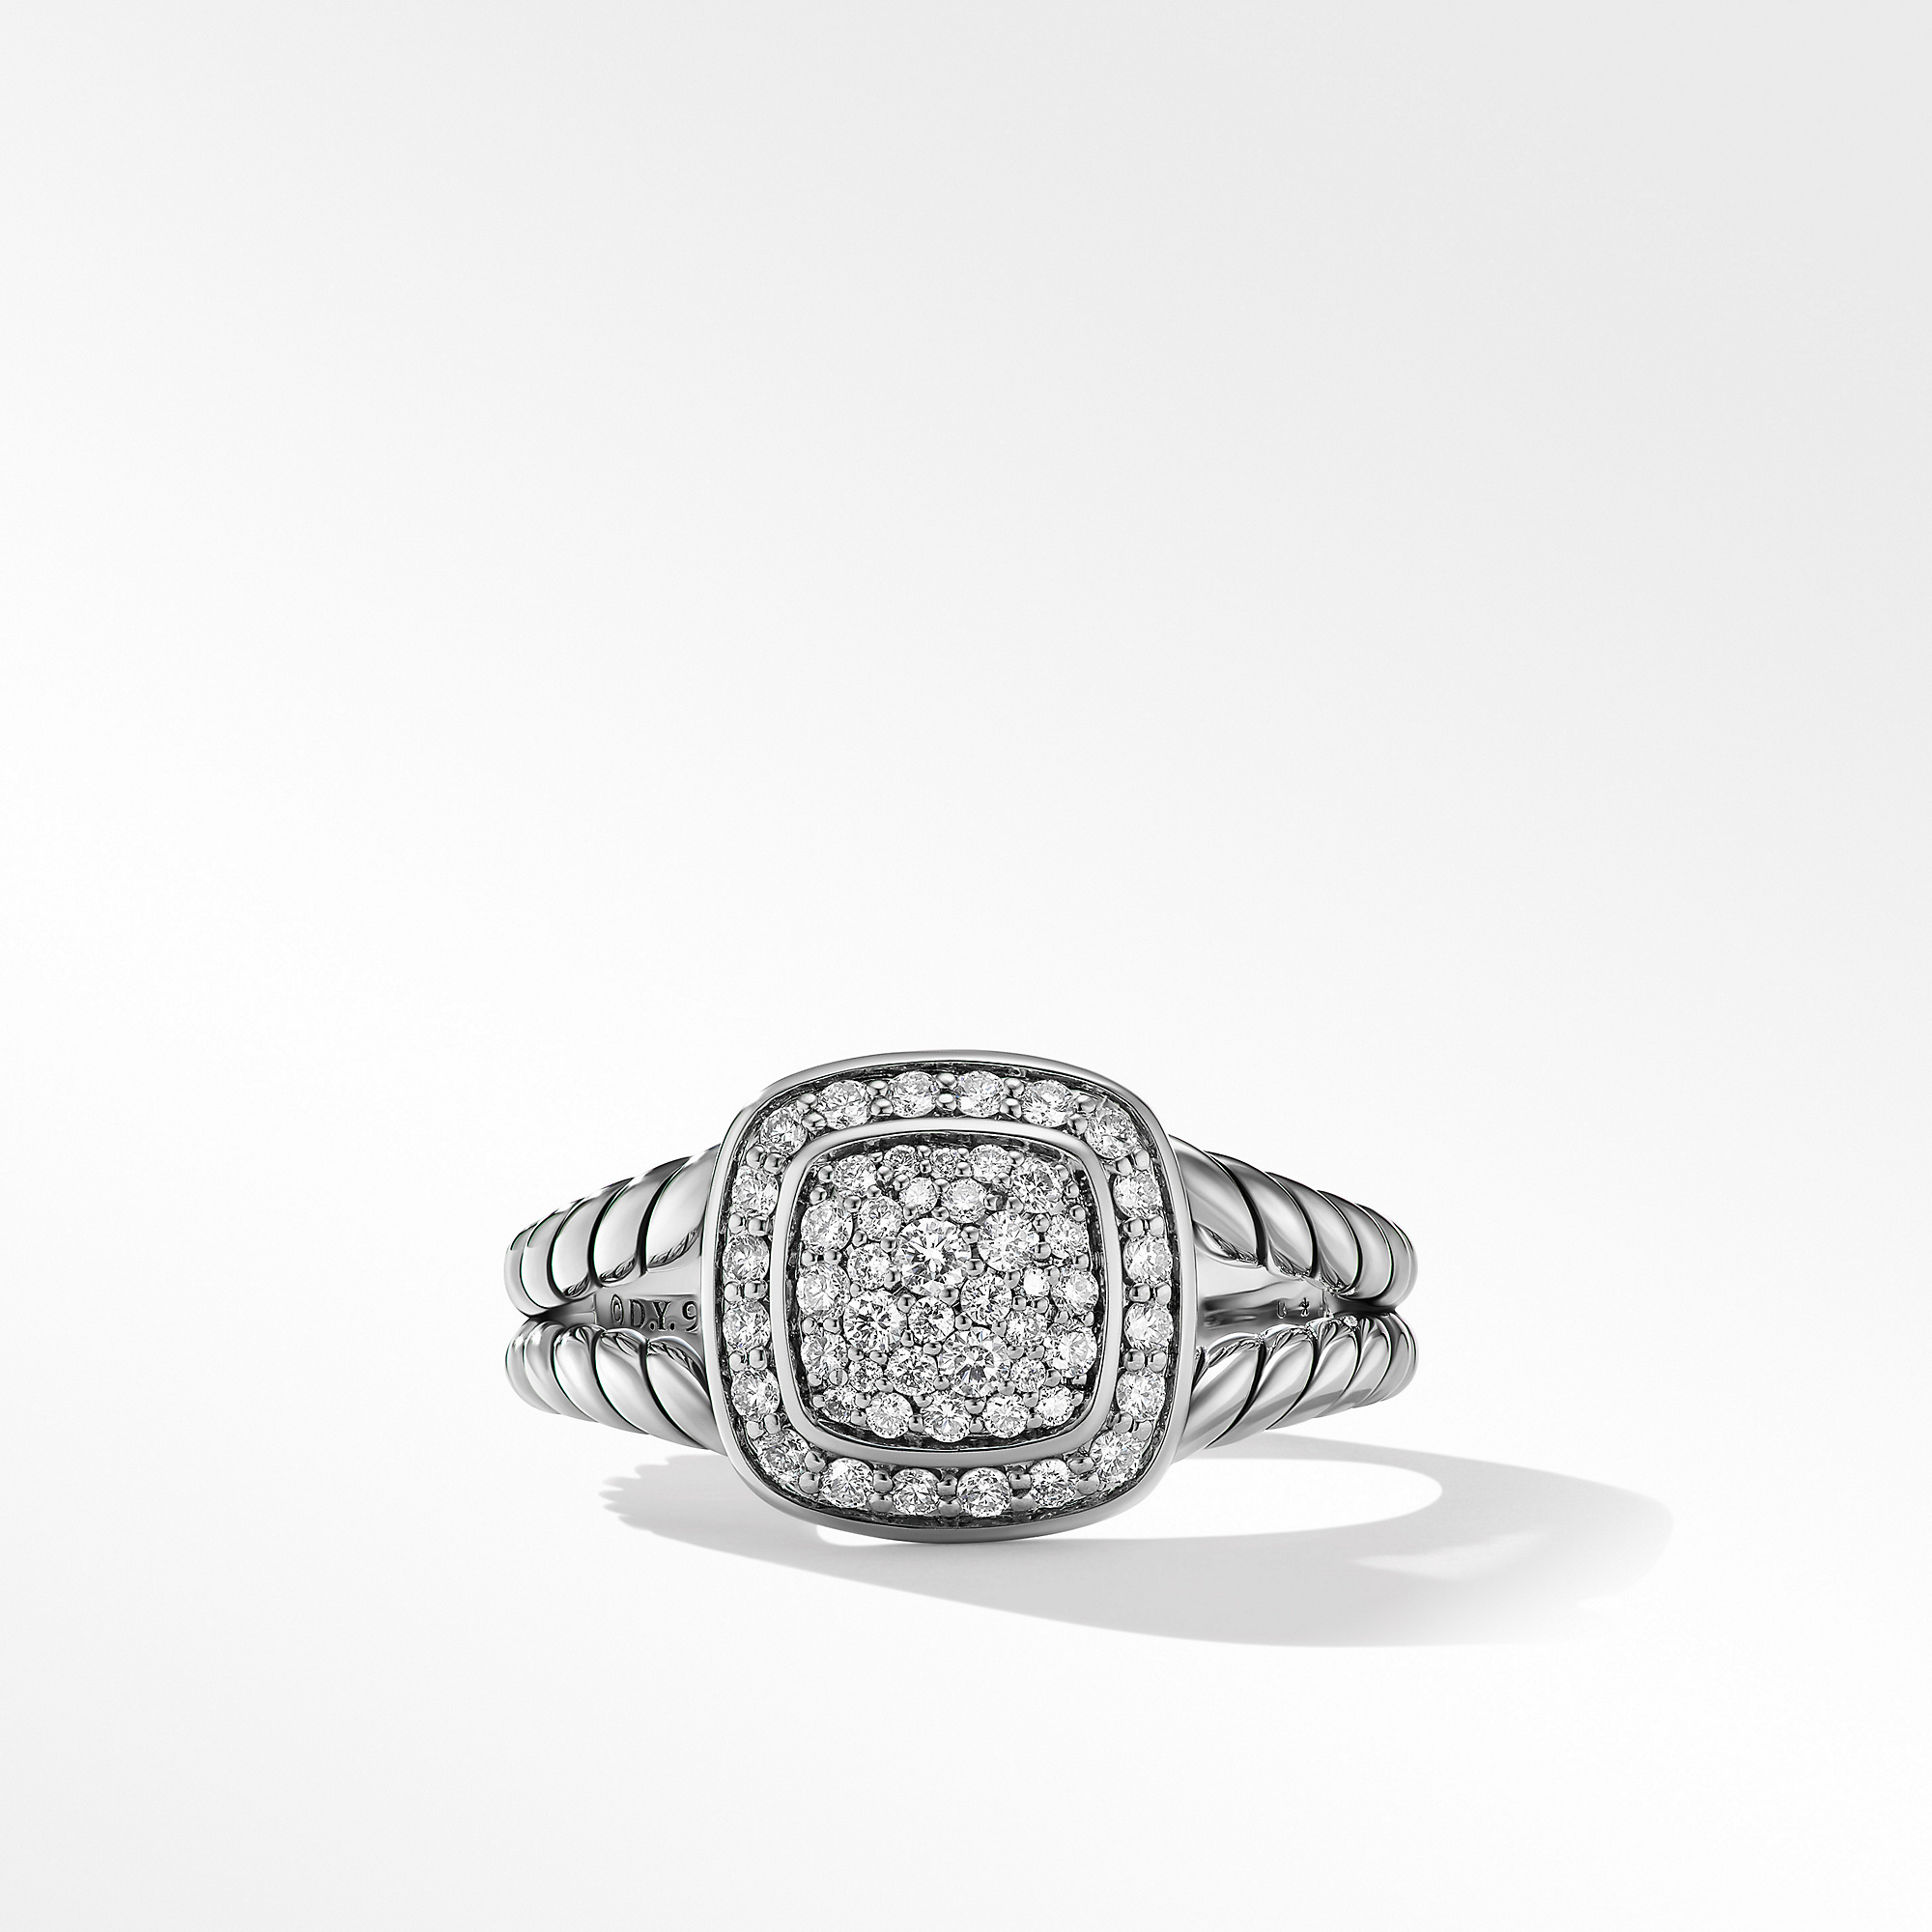 Petite Albion® Ring in Sterling Silver with Pave Diamonds